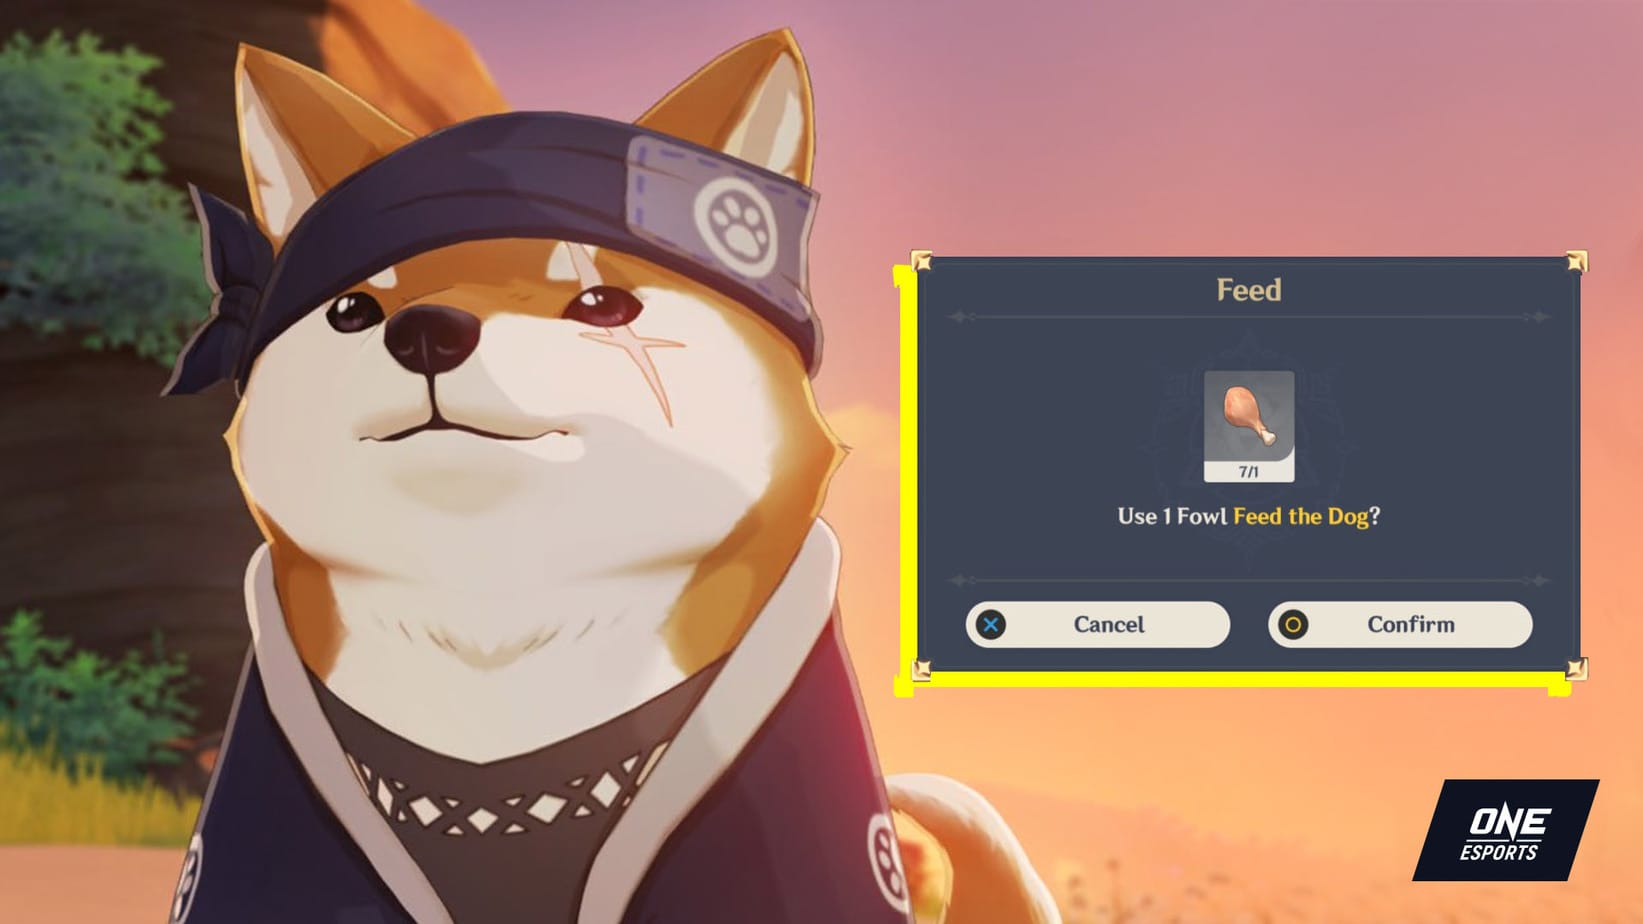 How to feed dogs, cats, foxes, and other animals in Genshin Impact | ONE Esports